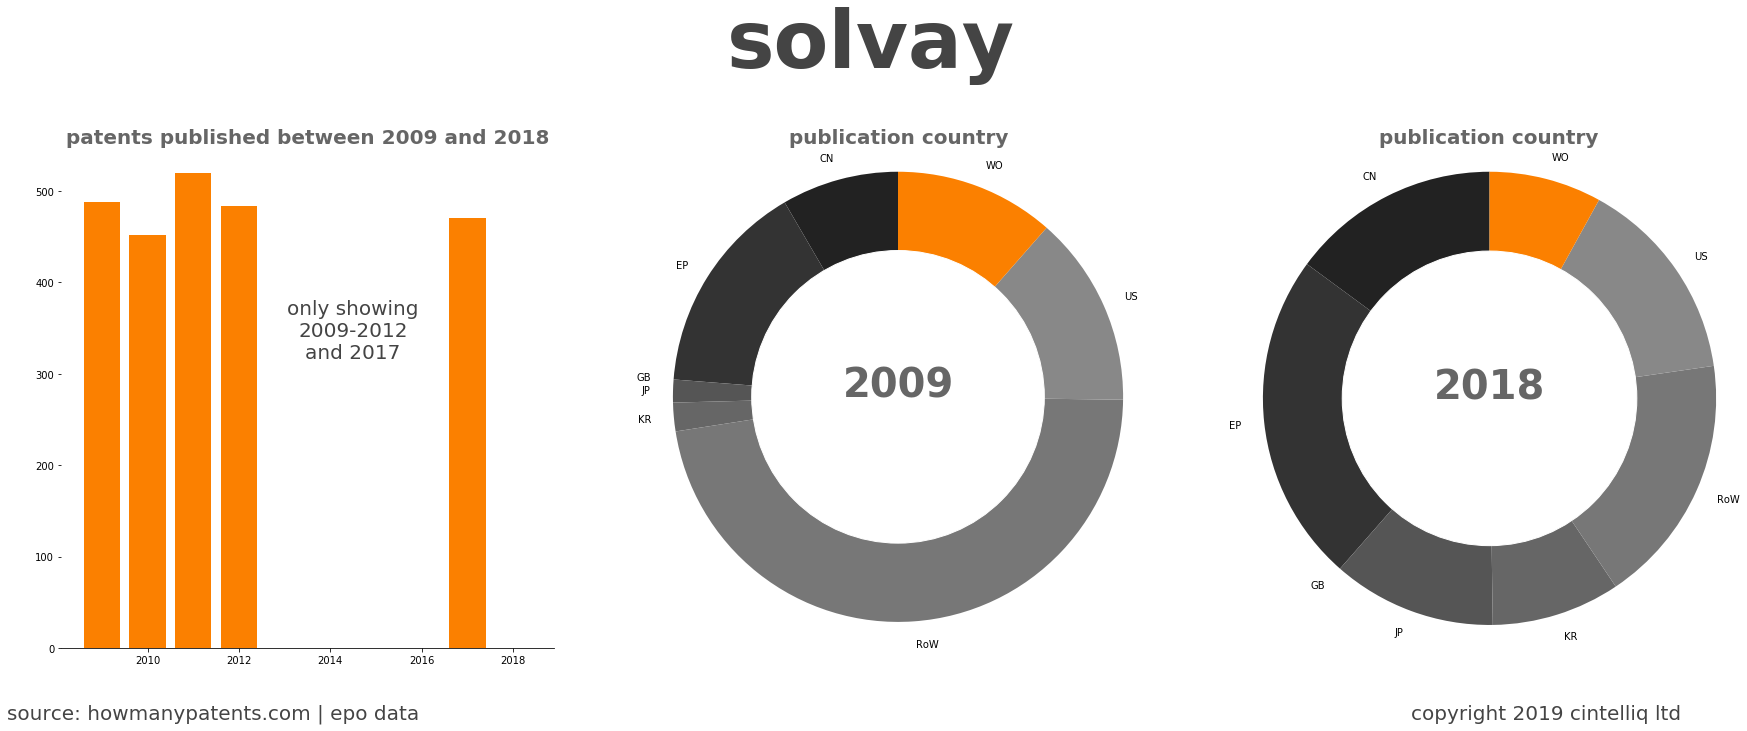 summary of patents for Solvay